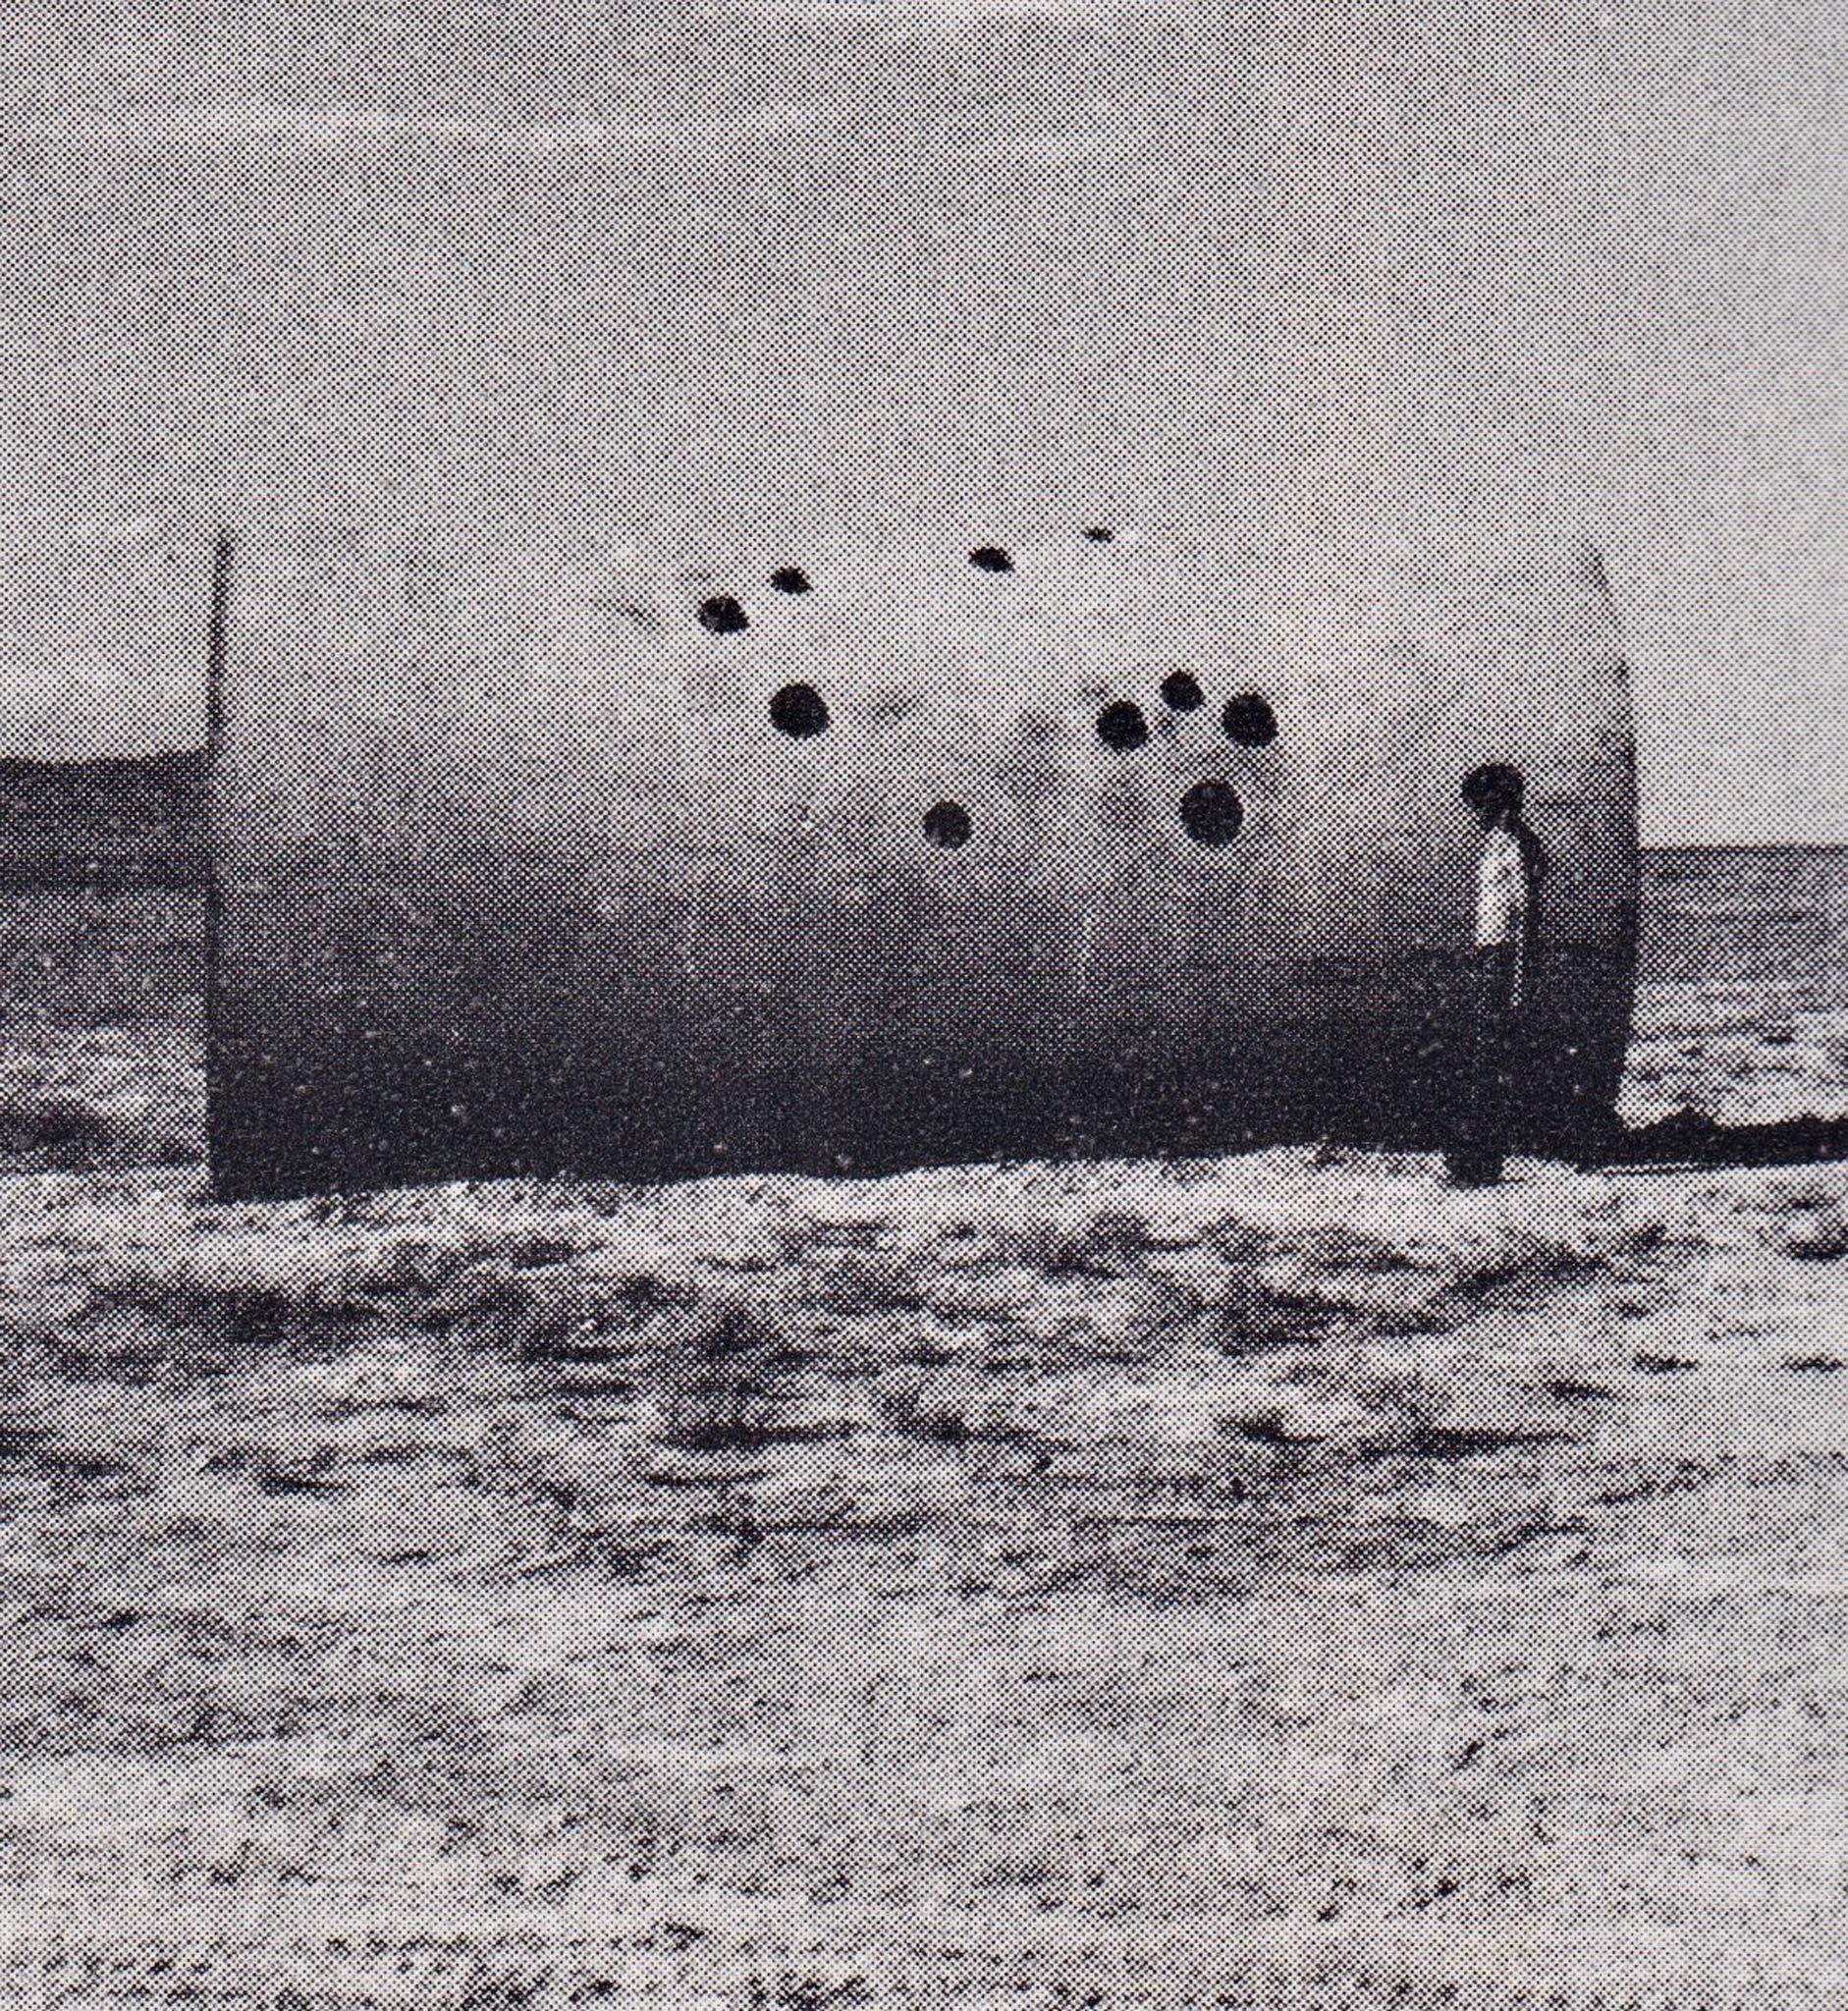 One Sun Tunnel seen from the side with one person standing next to it.